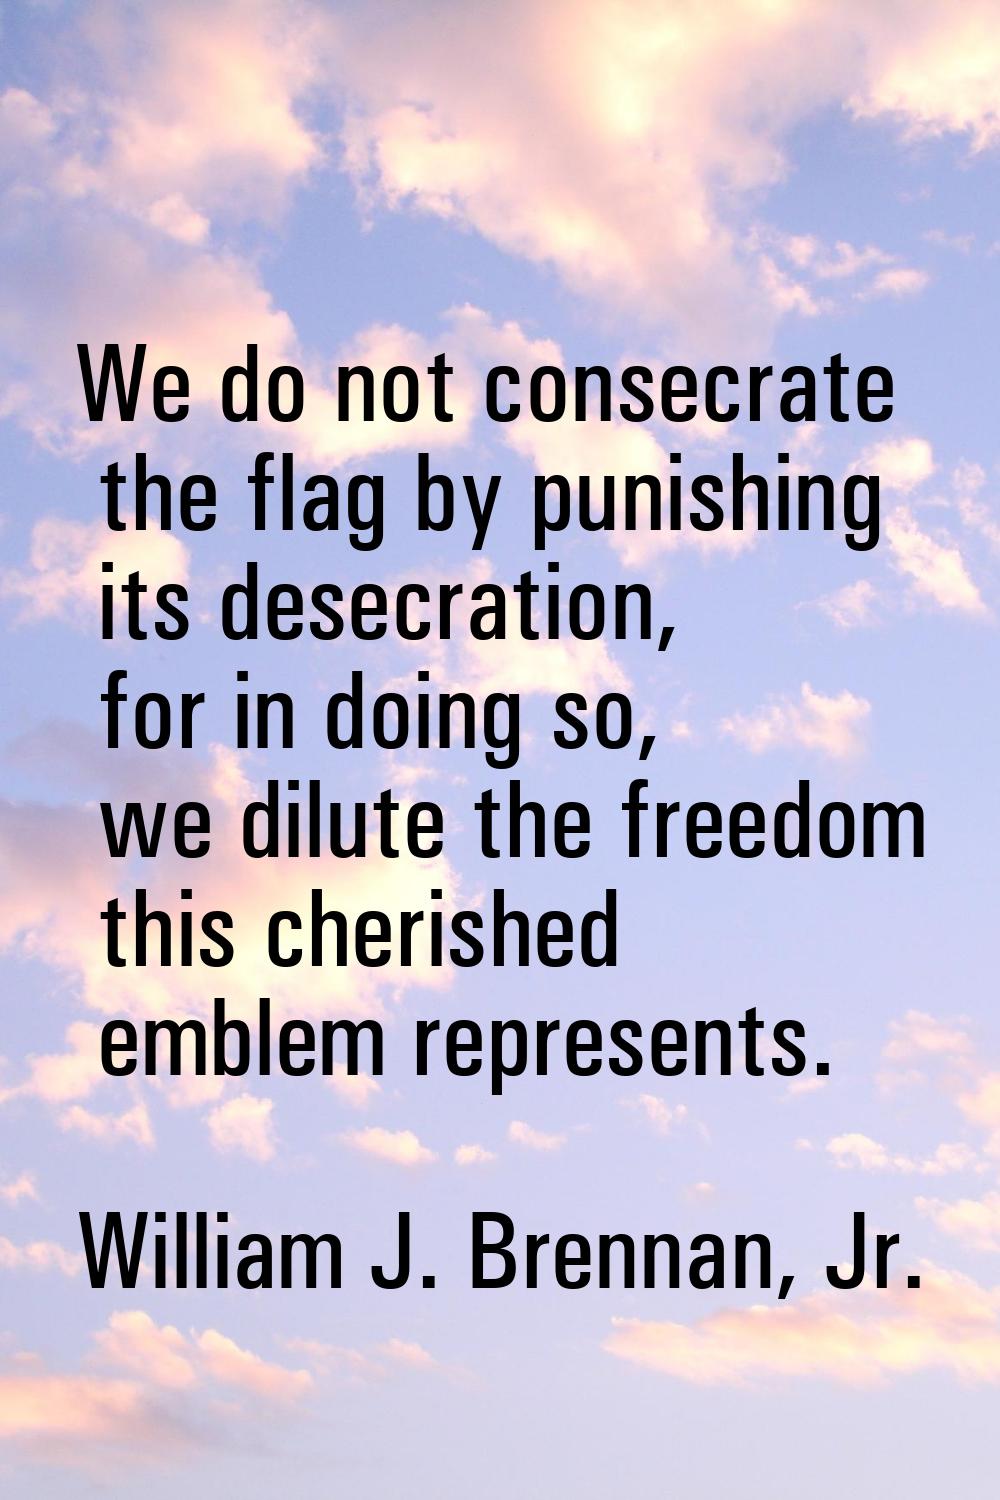 We do not consecrate the flag by punishing its desecration, for in doing so, we dilute the freedom 